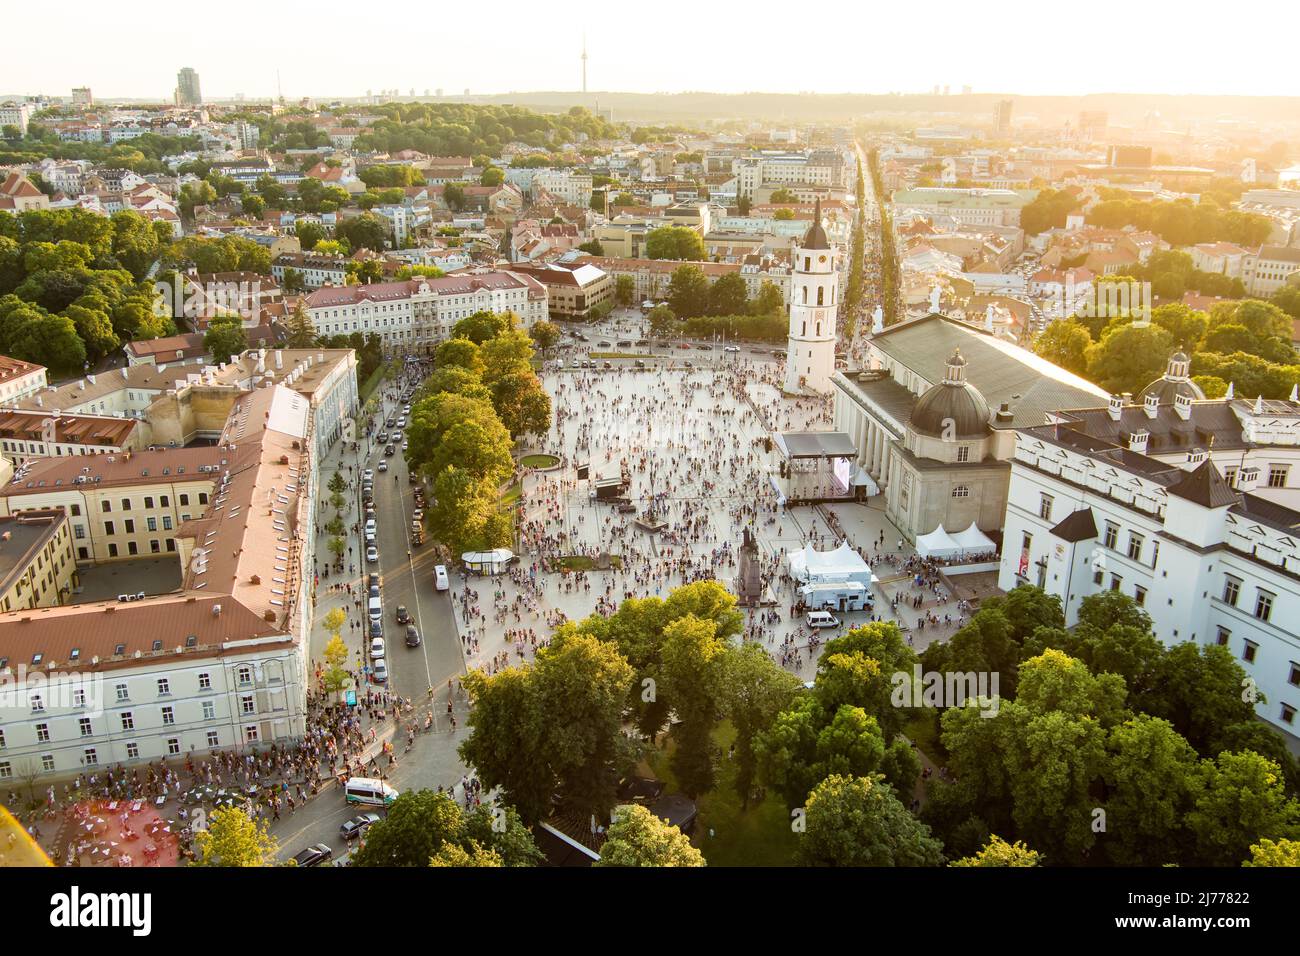 VILNIUS, LITHUANIA - JULY 6, 2021: Aerial view of crowds celebrating Lithuanian Statehood Day. Lots of people singing national anthem of Lithuania on Stock Photo